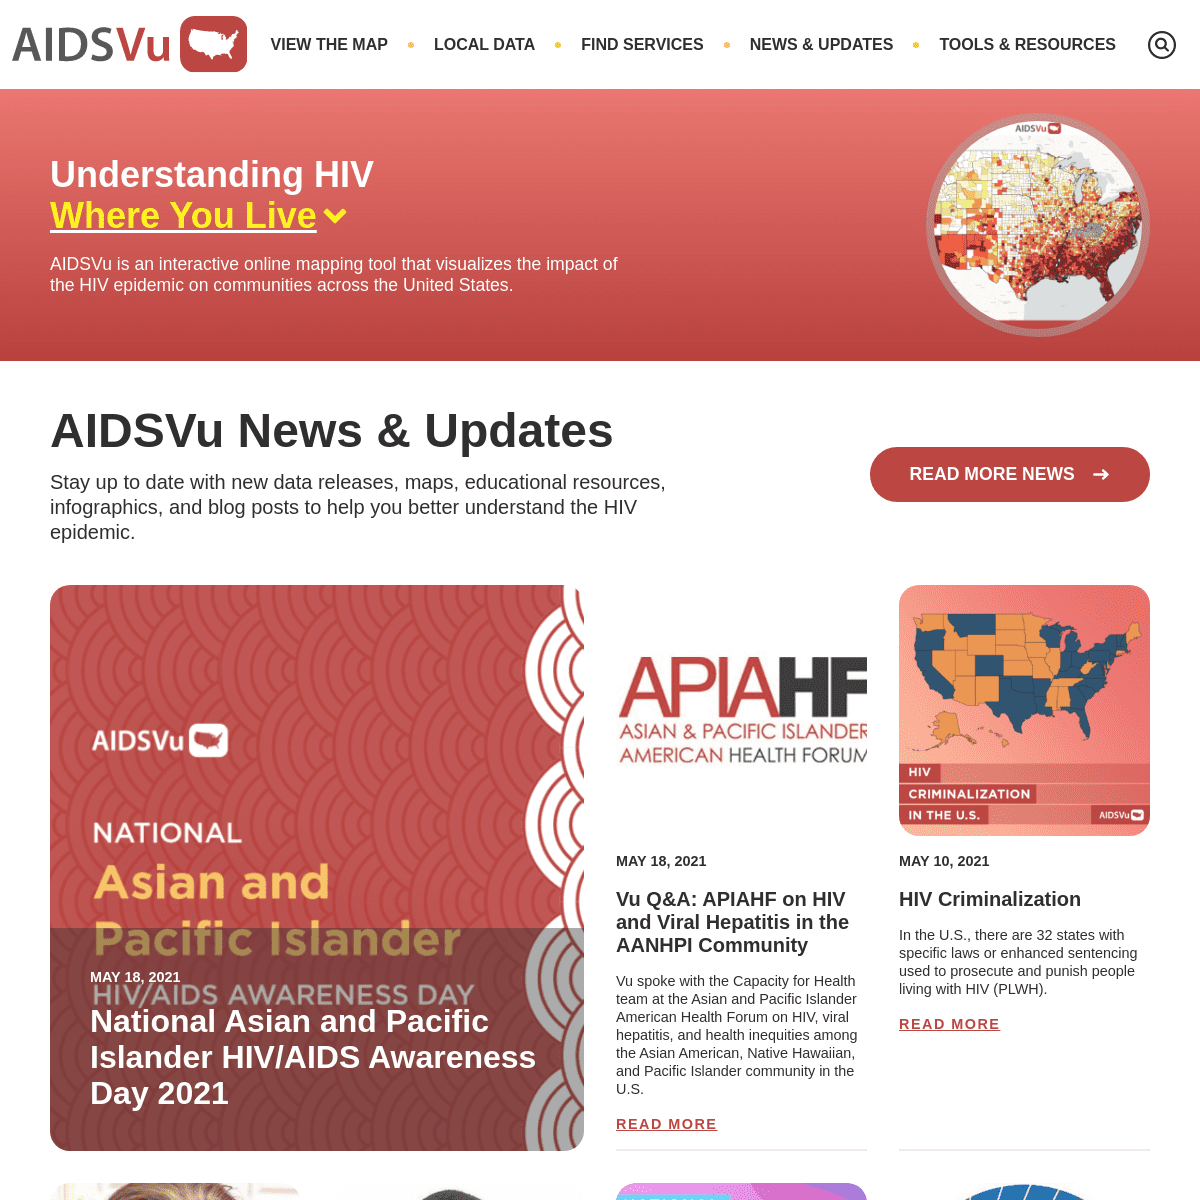 A complete backup of https://aidsvu.org